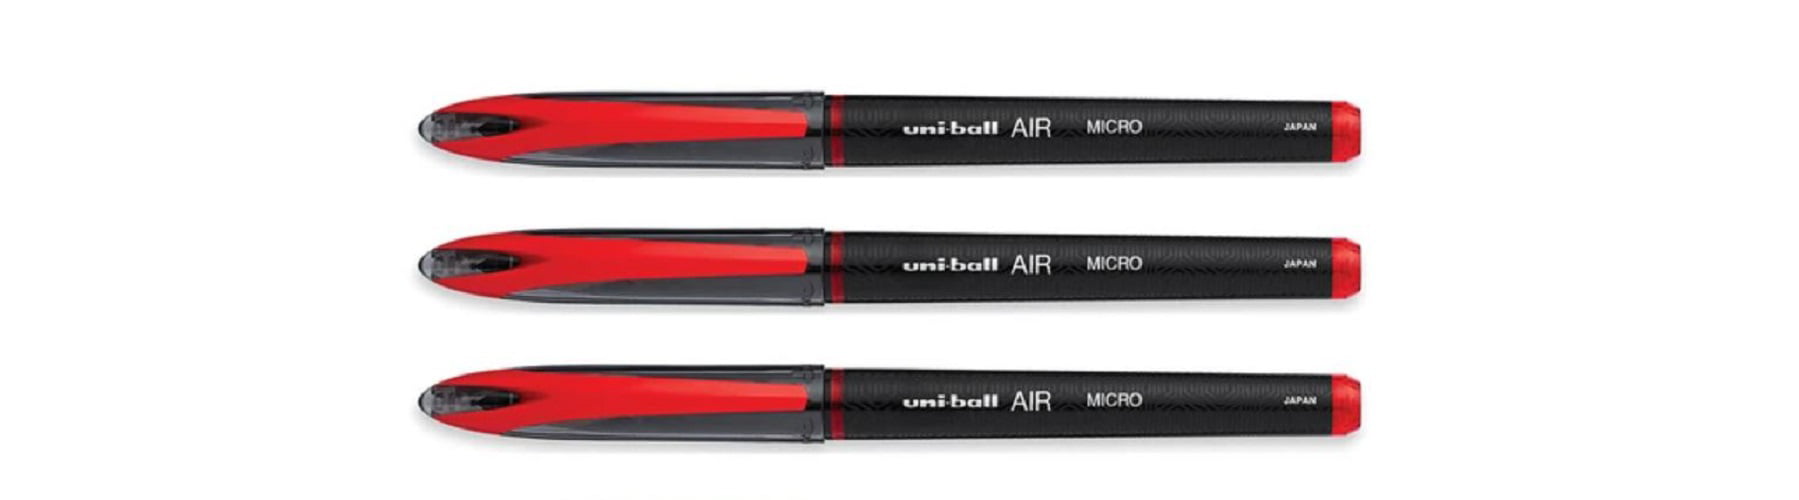 AIR Micro Blue Pack of 3 New and Red Black 0.5mm Fine Rollerball 